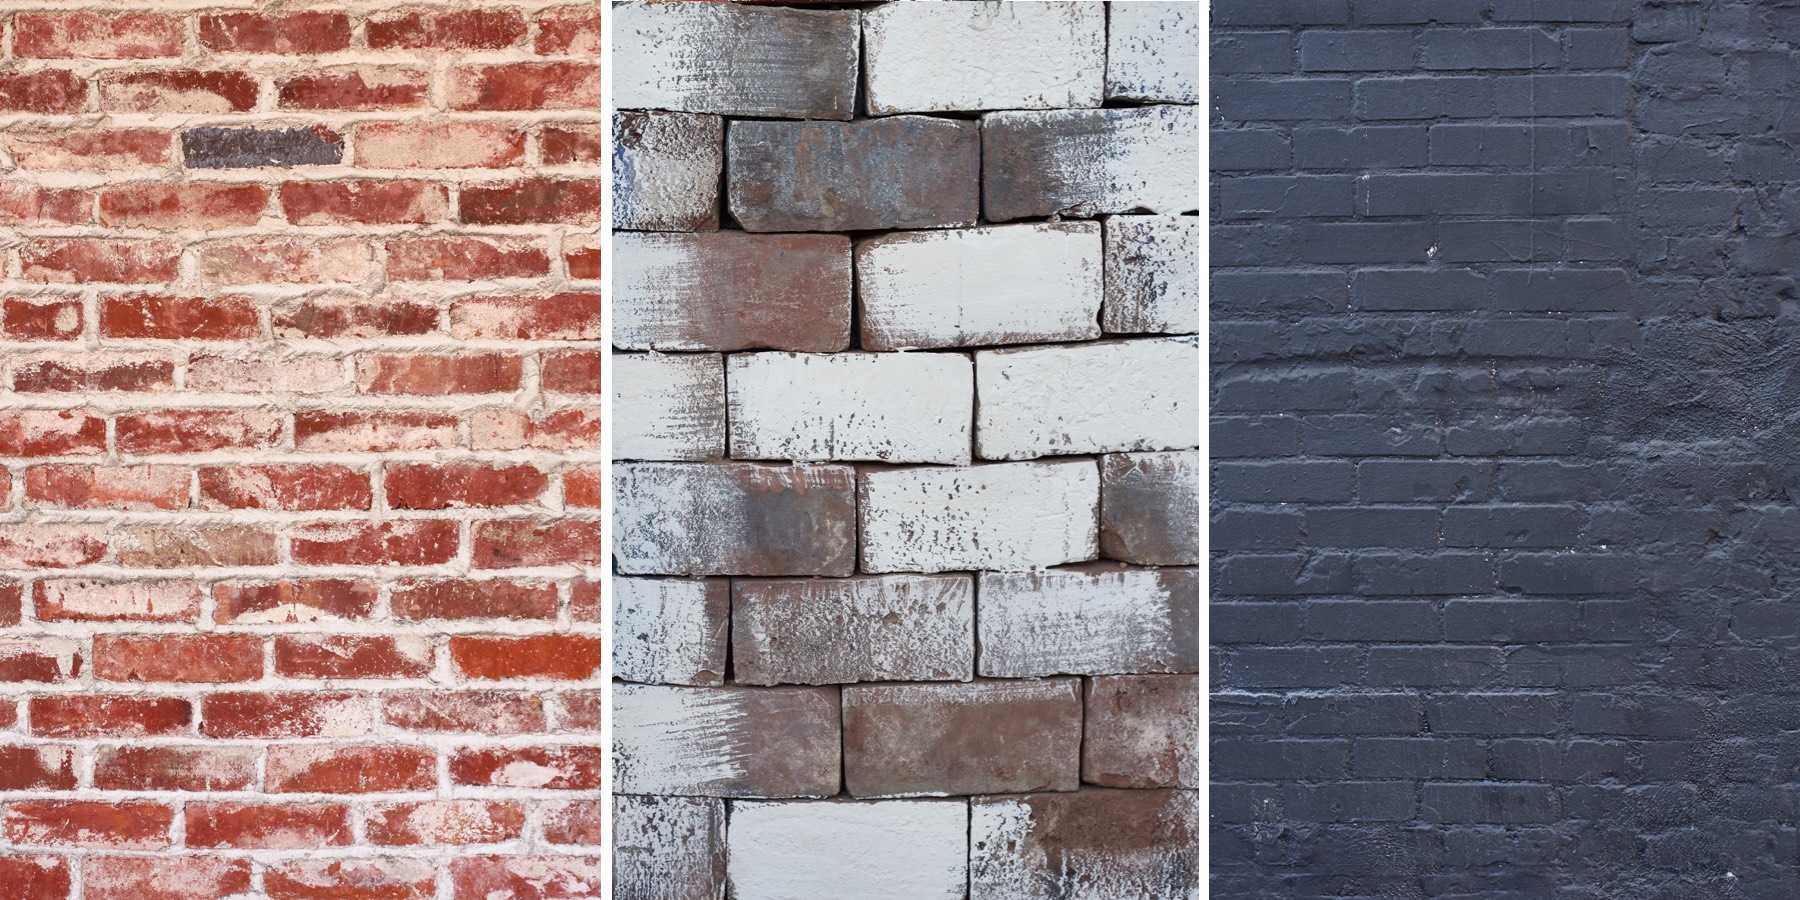 Showing off some of the free brick textures